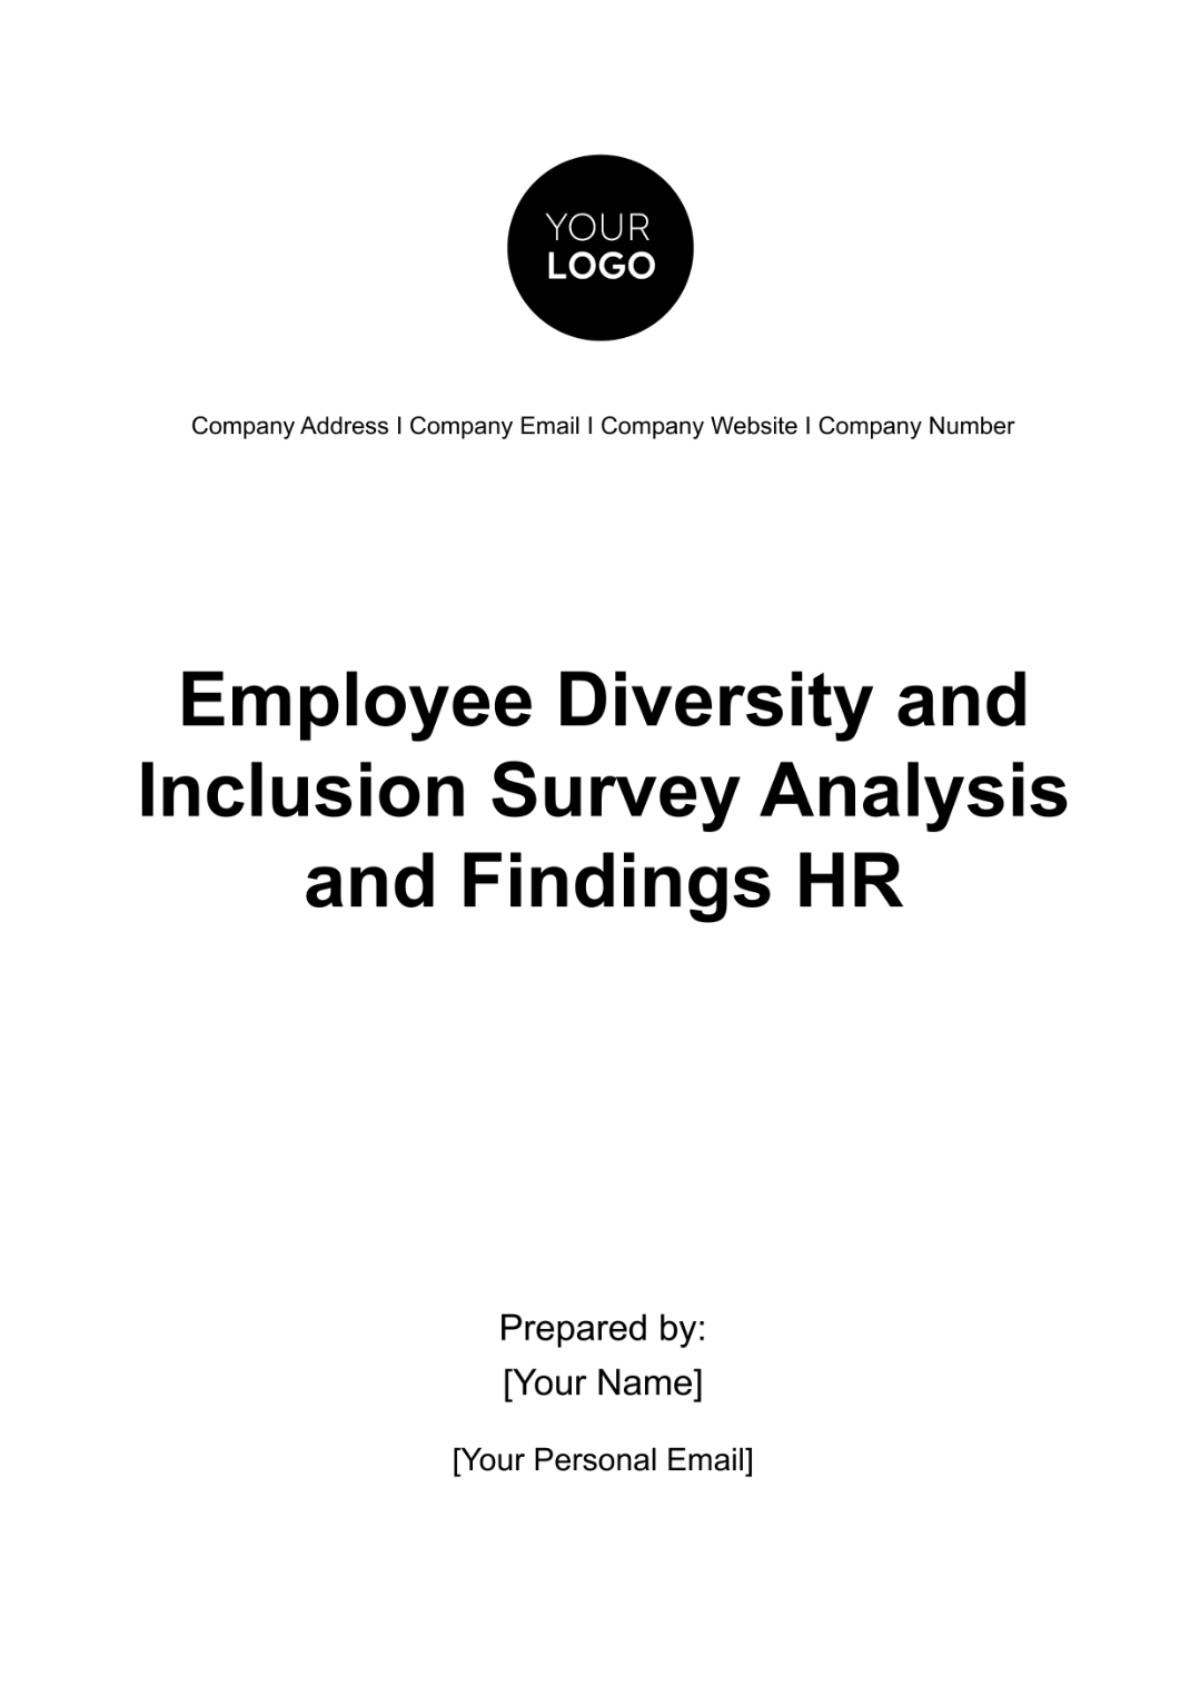 Free Employee Diversity and Inclusion Survey Analysis and Findings HR Template